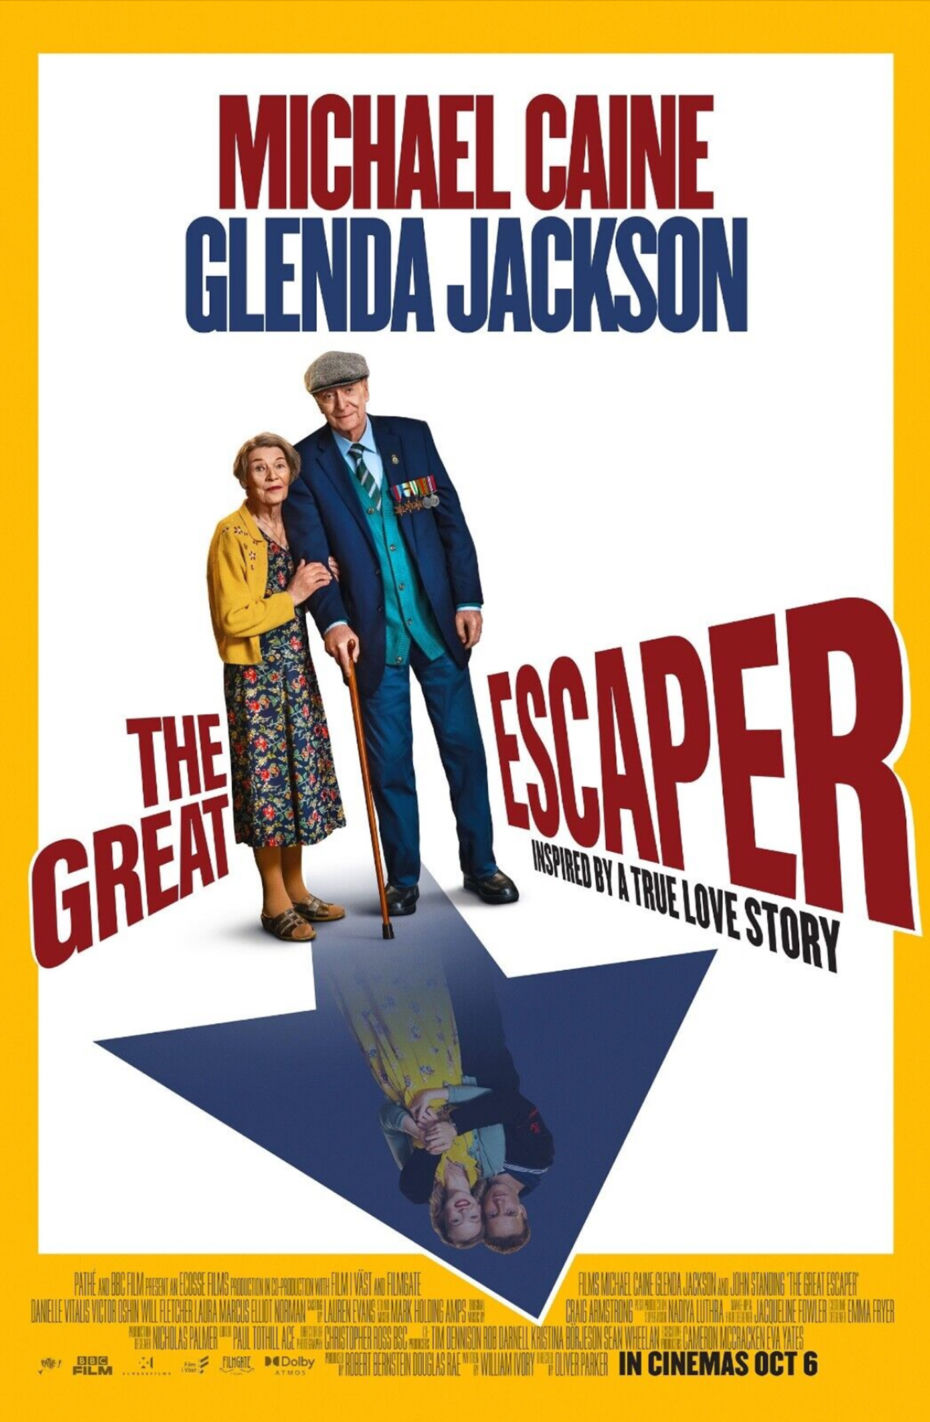 Cinema poster for The Great Escaper with Michael Caine and Glenda Jackson